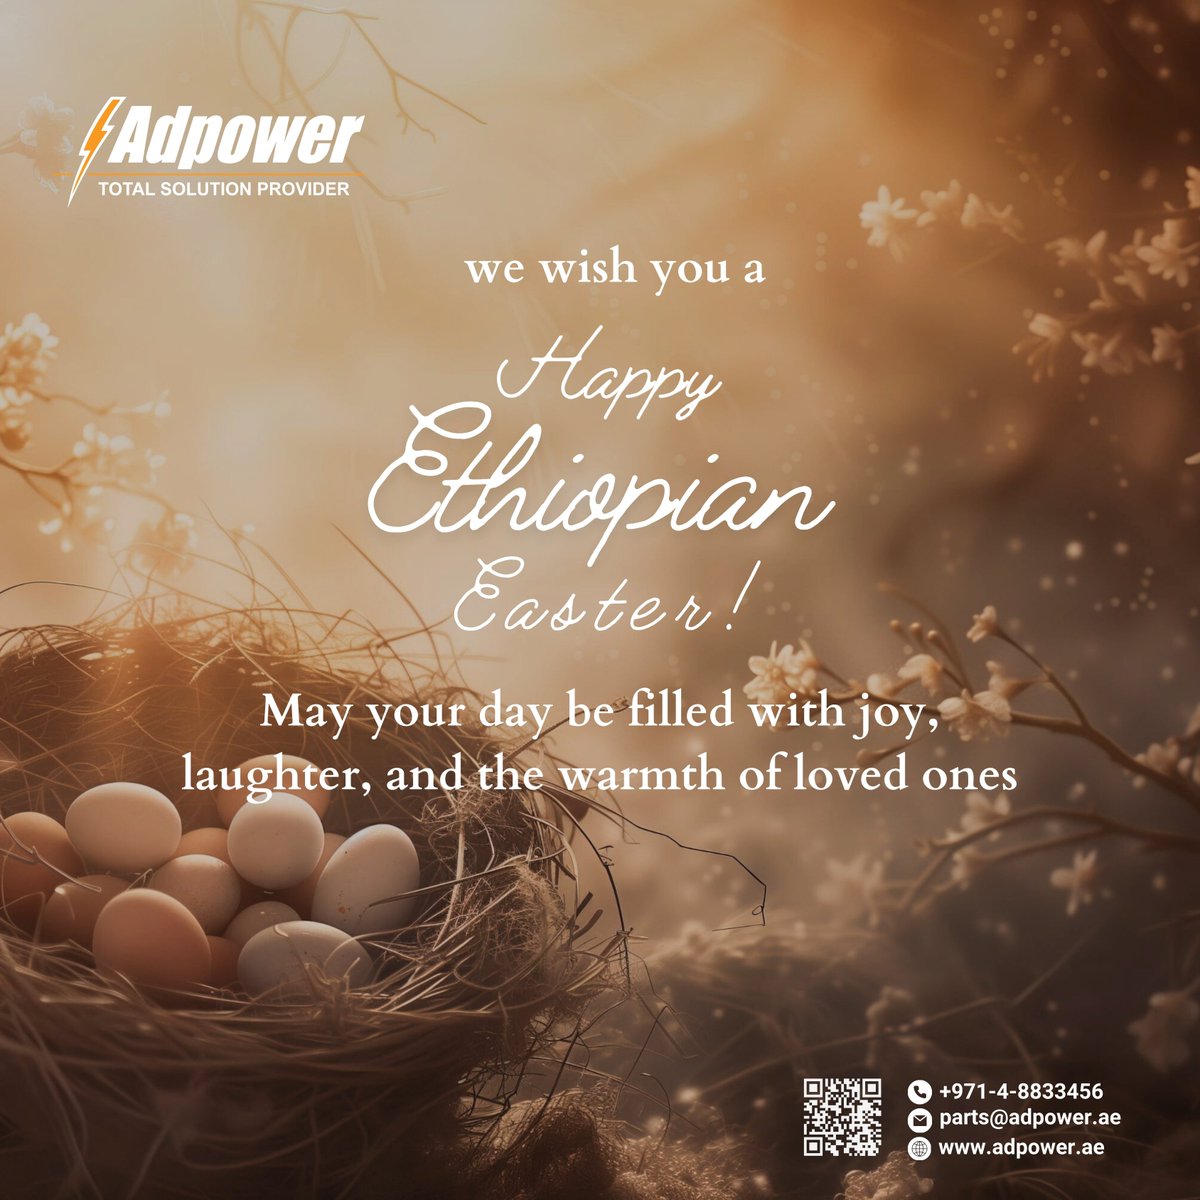 We wish you a Happy Ethiopian Easter!
May your day be filled with joy, laughter, and the warmth of loved ones
#adpower #adpowerrenewables #HappyEthiopianEaster #EasterSunday #Easter2024 #EasterBunny